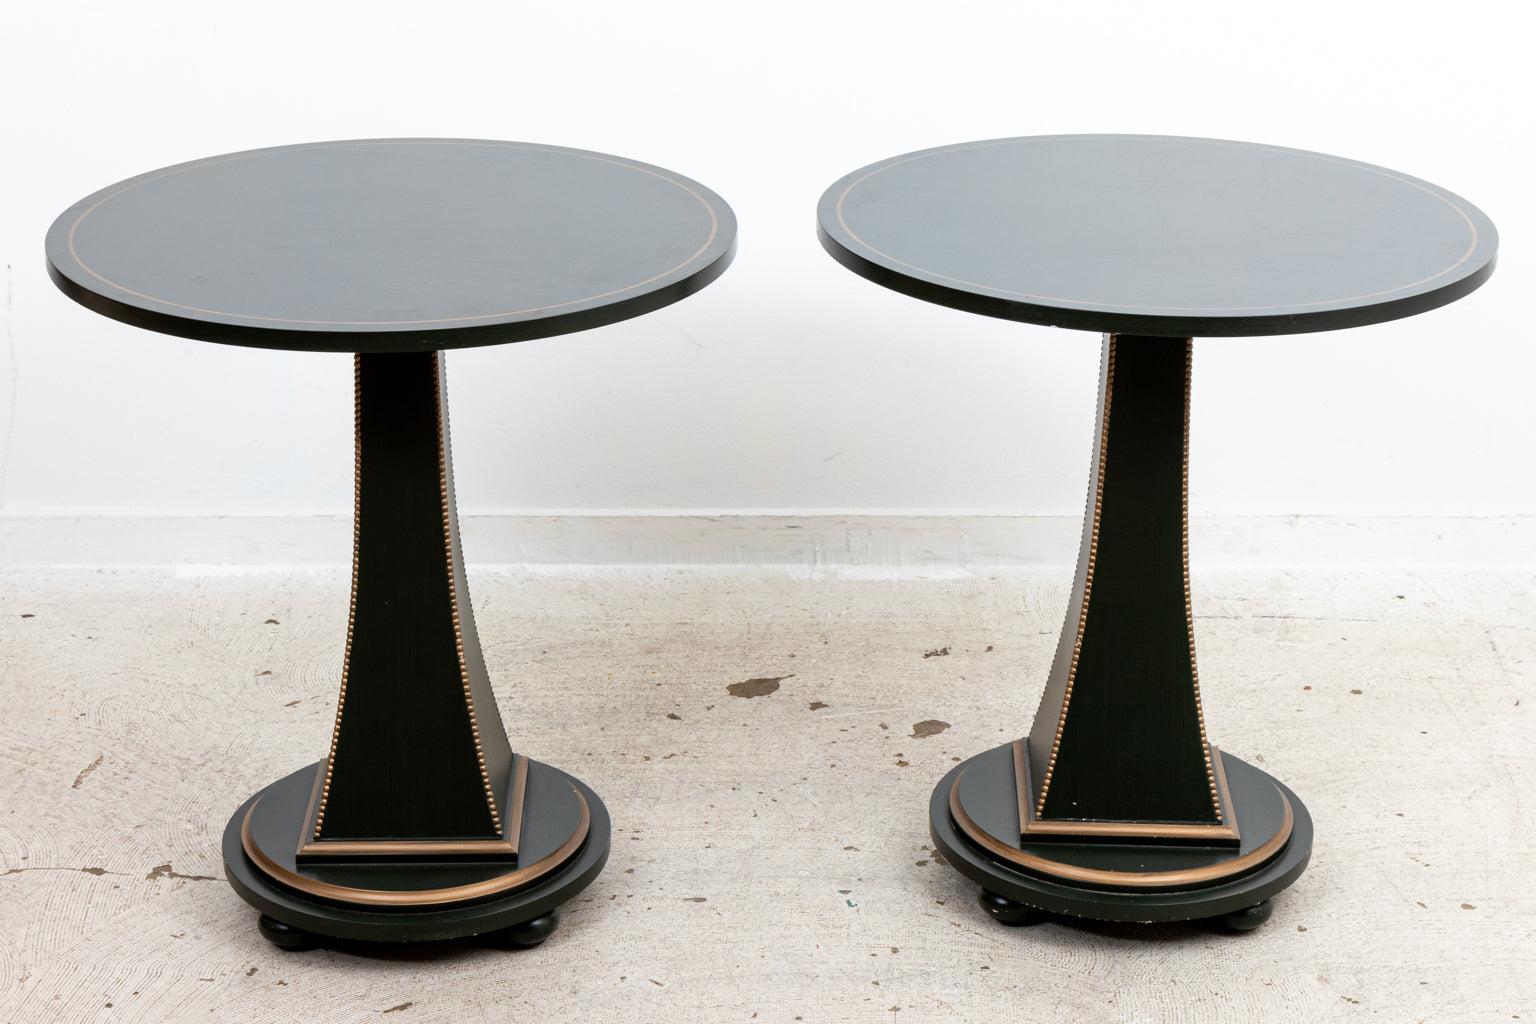 Pair of Italian style pedestal tables in dark olive green color with 
gold painted accent detail and beaded edge square trim. The tables are 
supported by tapered columns mounted on circular plinth bases.
